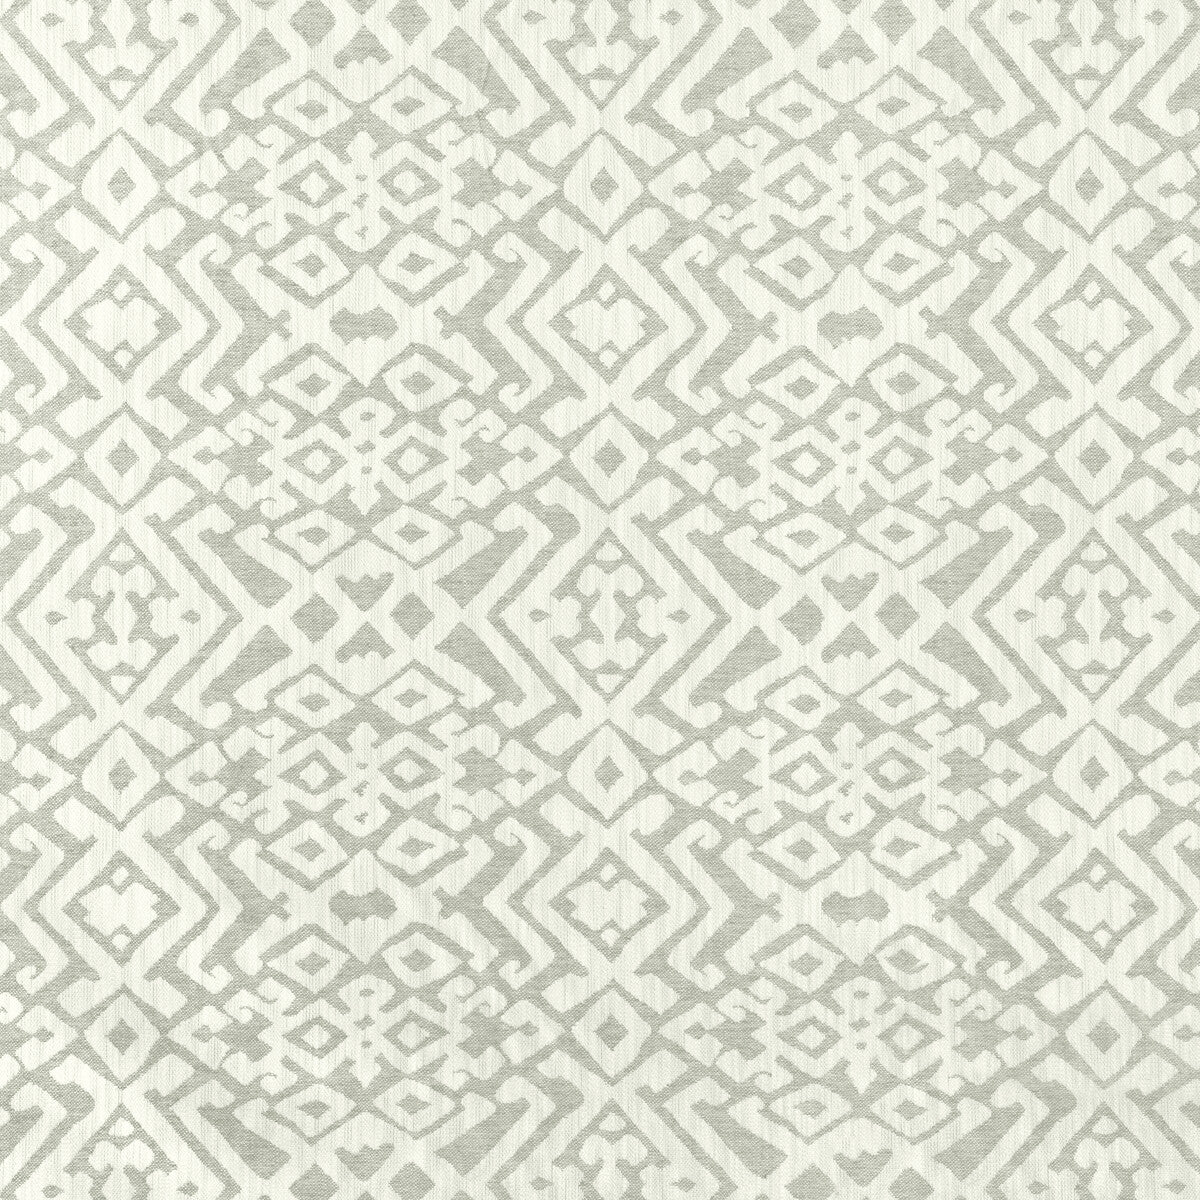 Springbok fabric in pewter color - pattern 36874.11.0 - by Kravet Couture in the Atelier Weaves collection